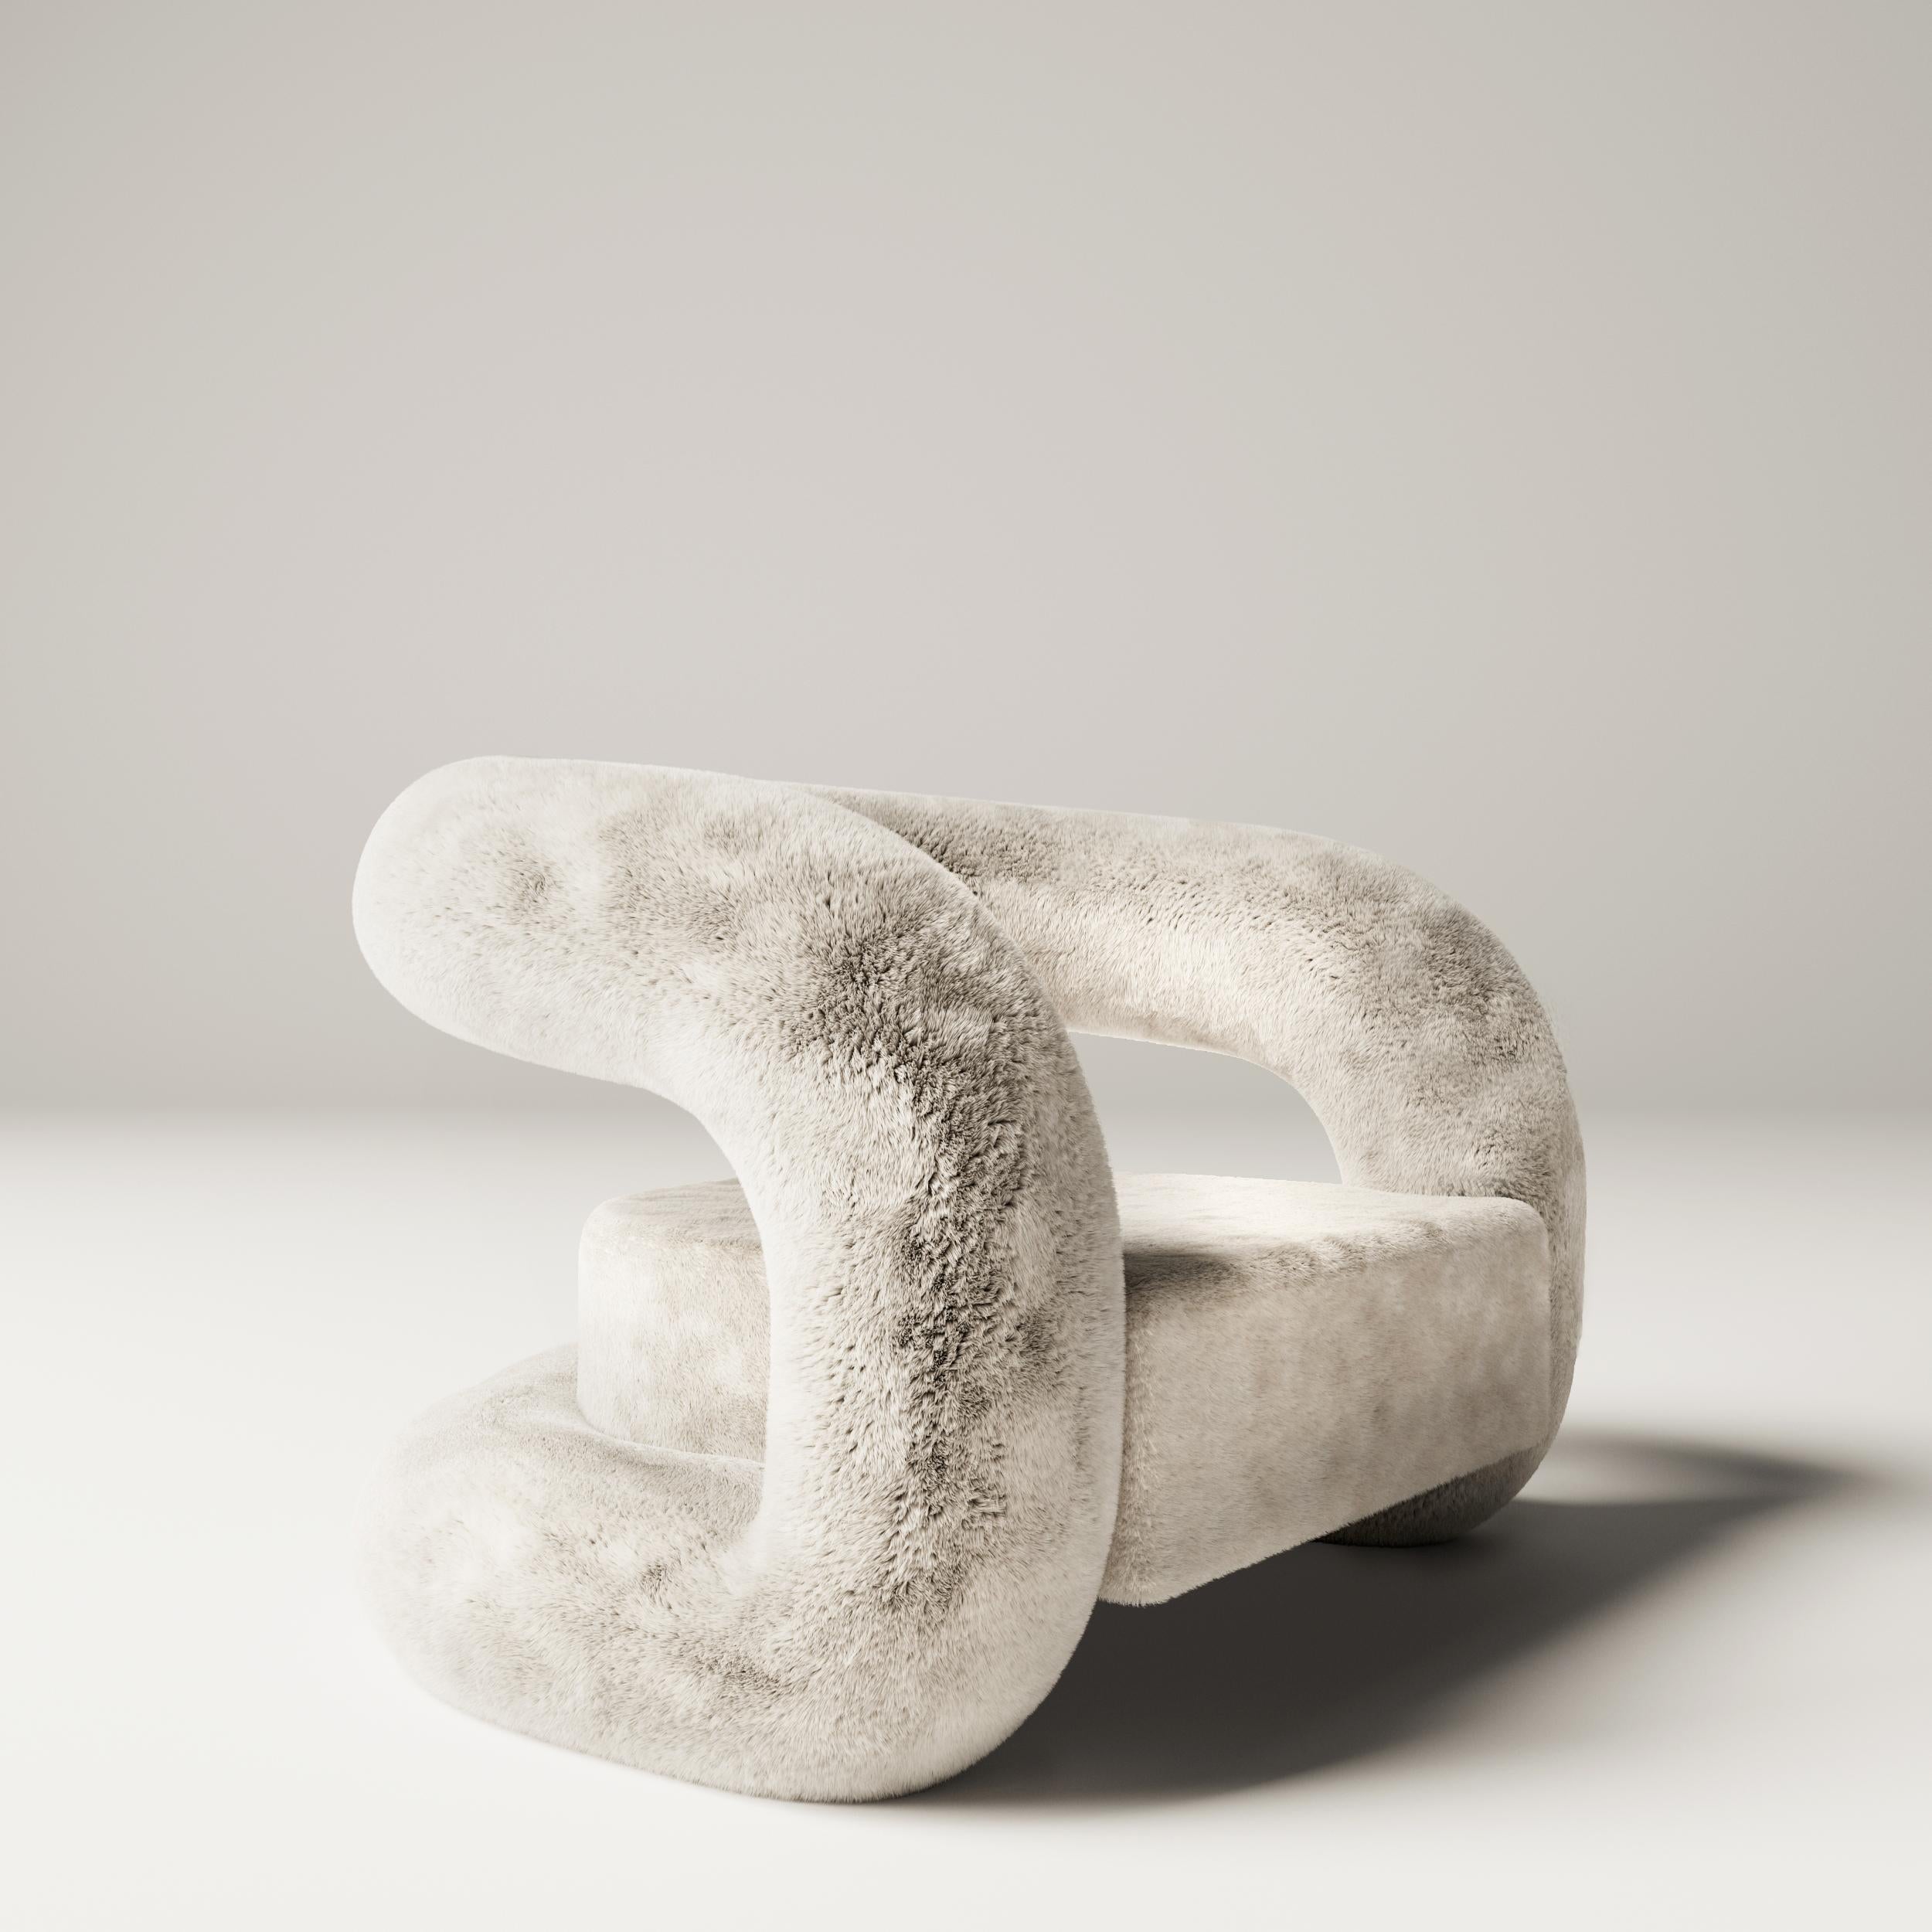 BOW ARMCHAIR

Attracting attention with its oval unusual form, Bow Berjer is an ideal design for very different places. With its geometric structure covered with bow plush and teddy fabric, it manages to maintain its elegance in all areas despite